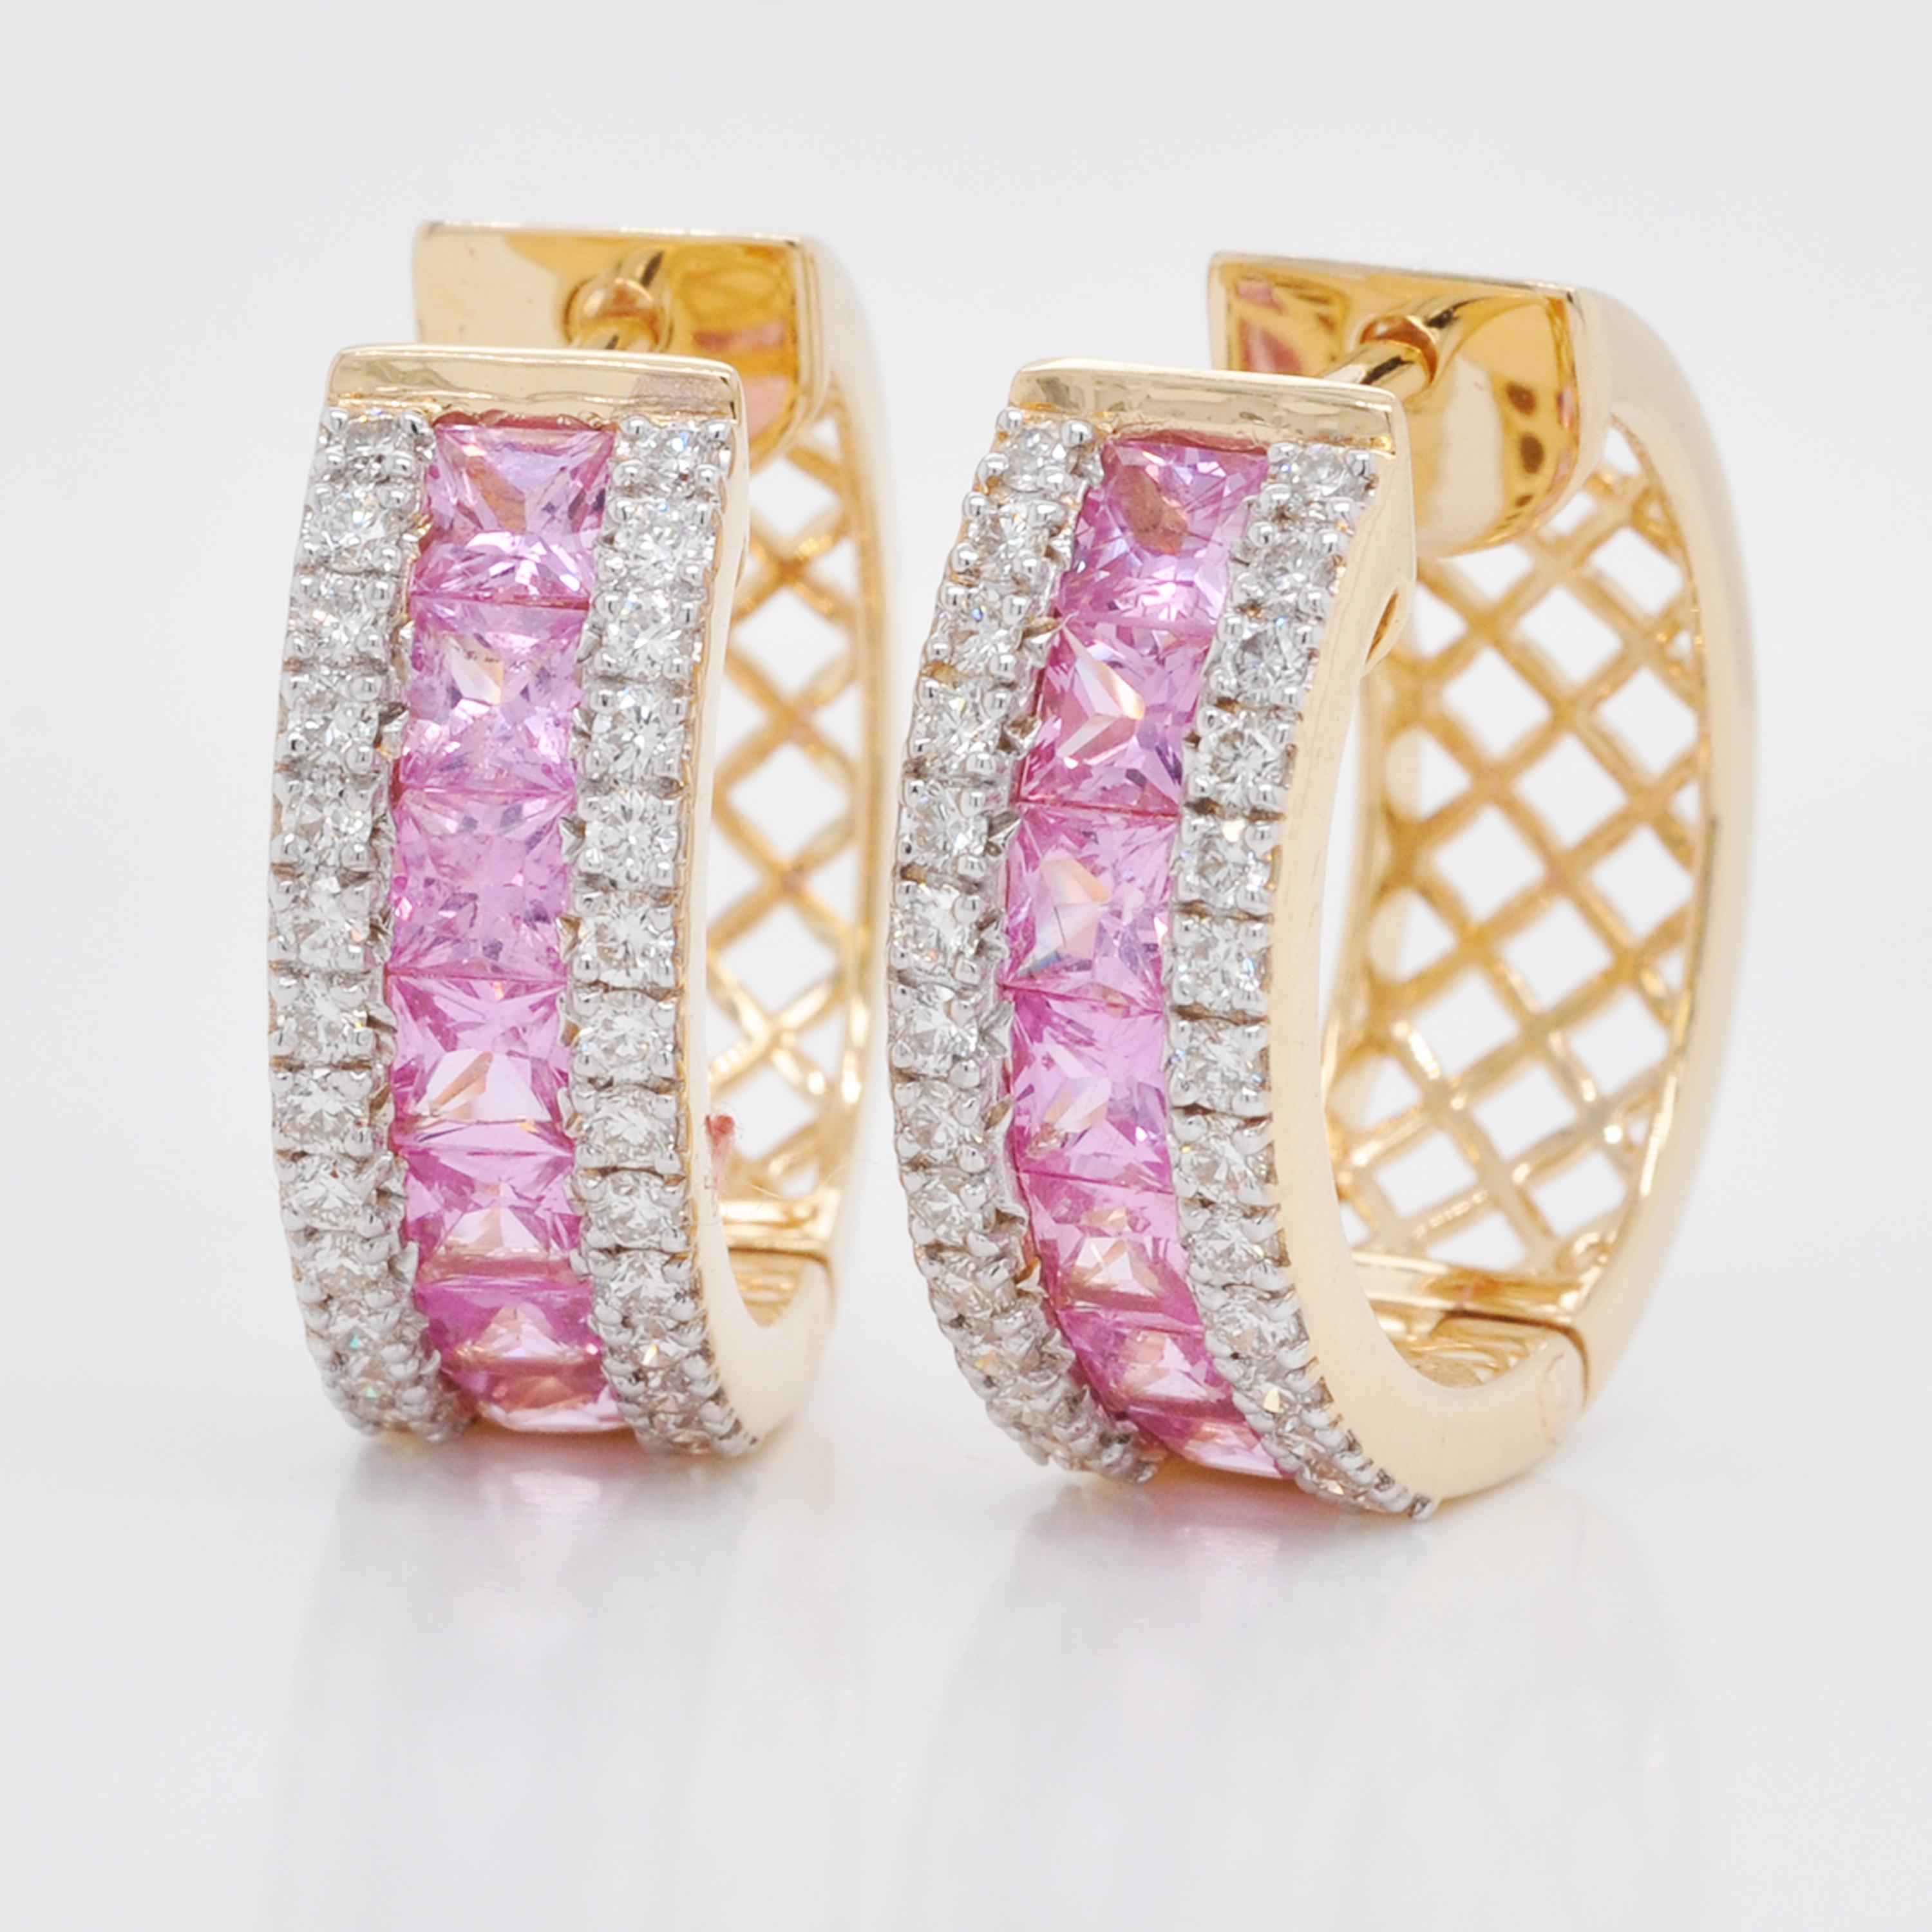 Contemporary 18K Gold Channel Set Princess Cut Pink Sapphire Diamond Huggies Hoops Earrings For Sale